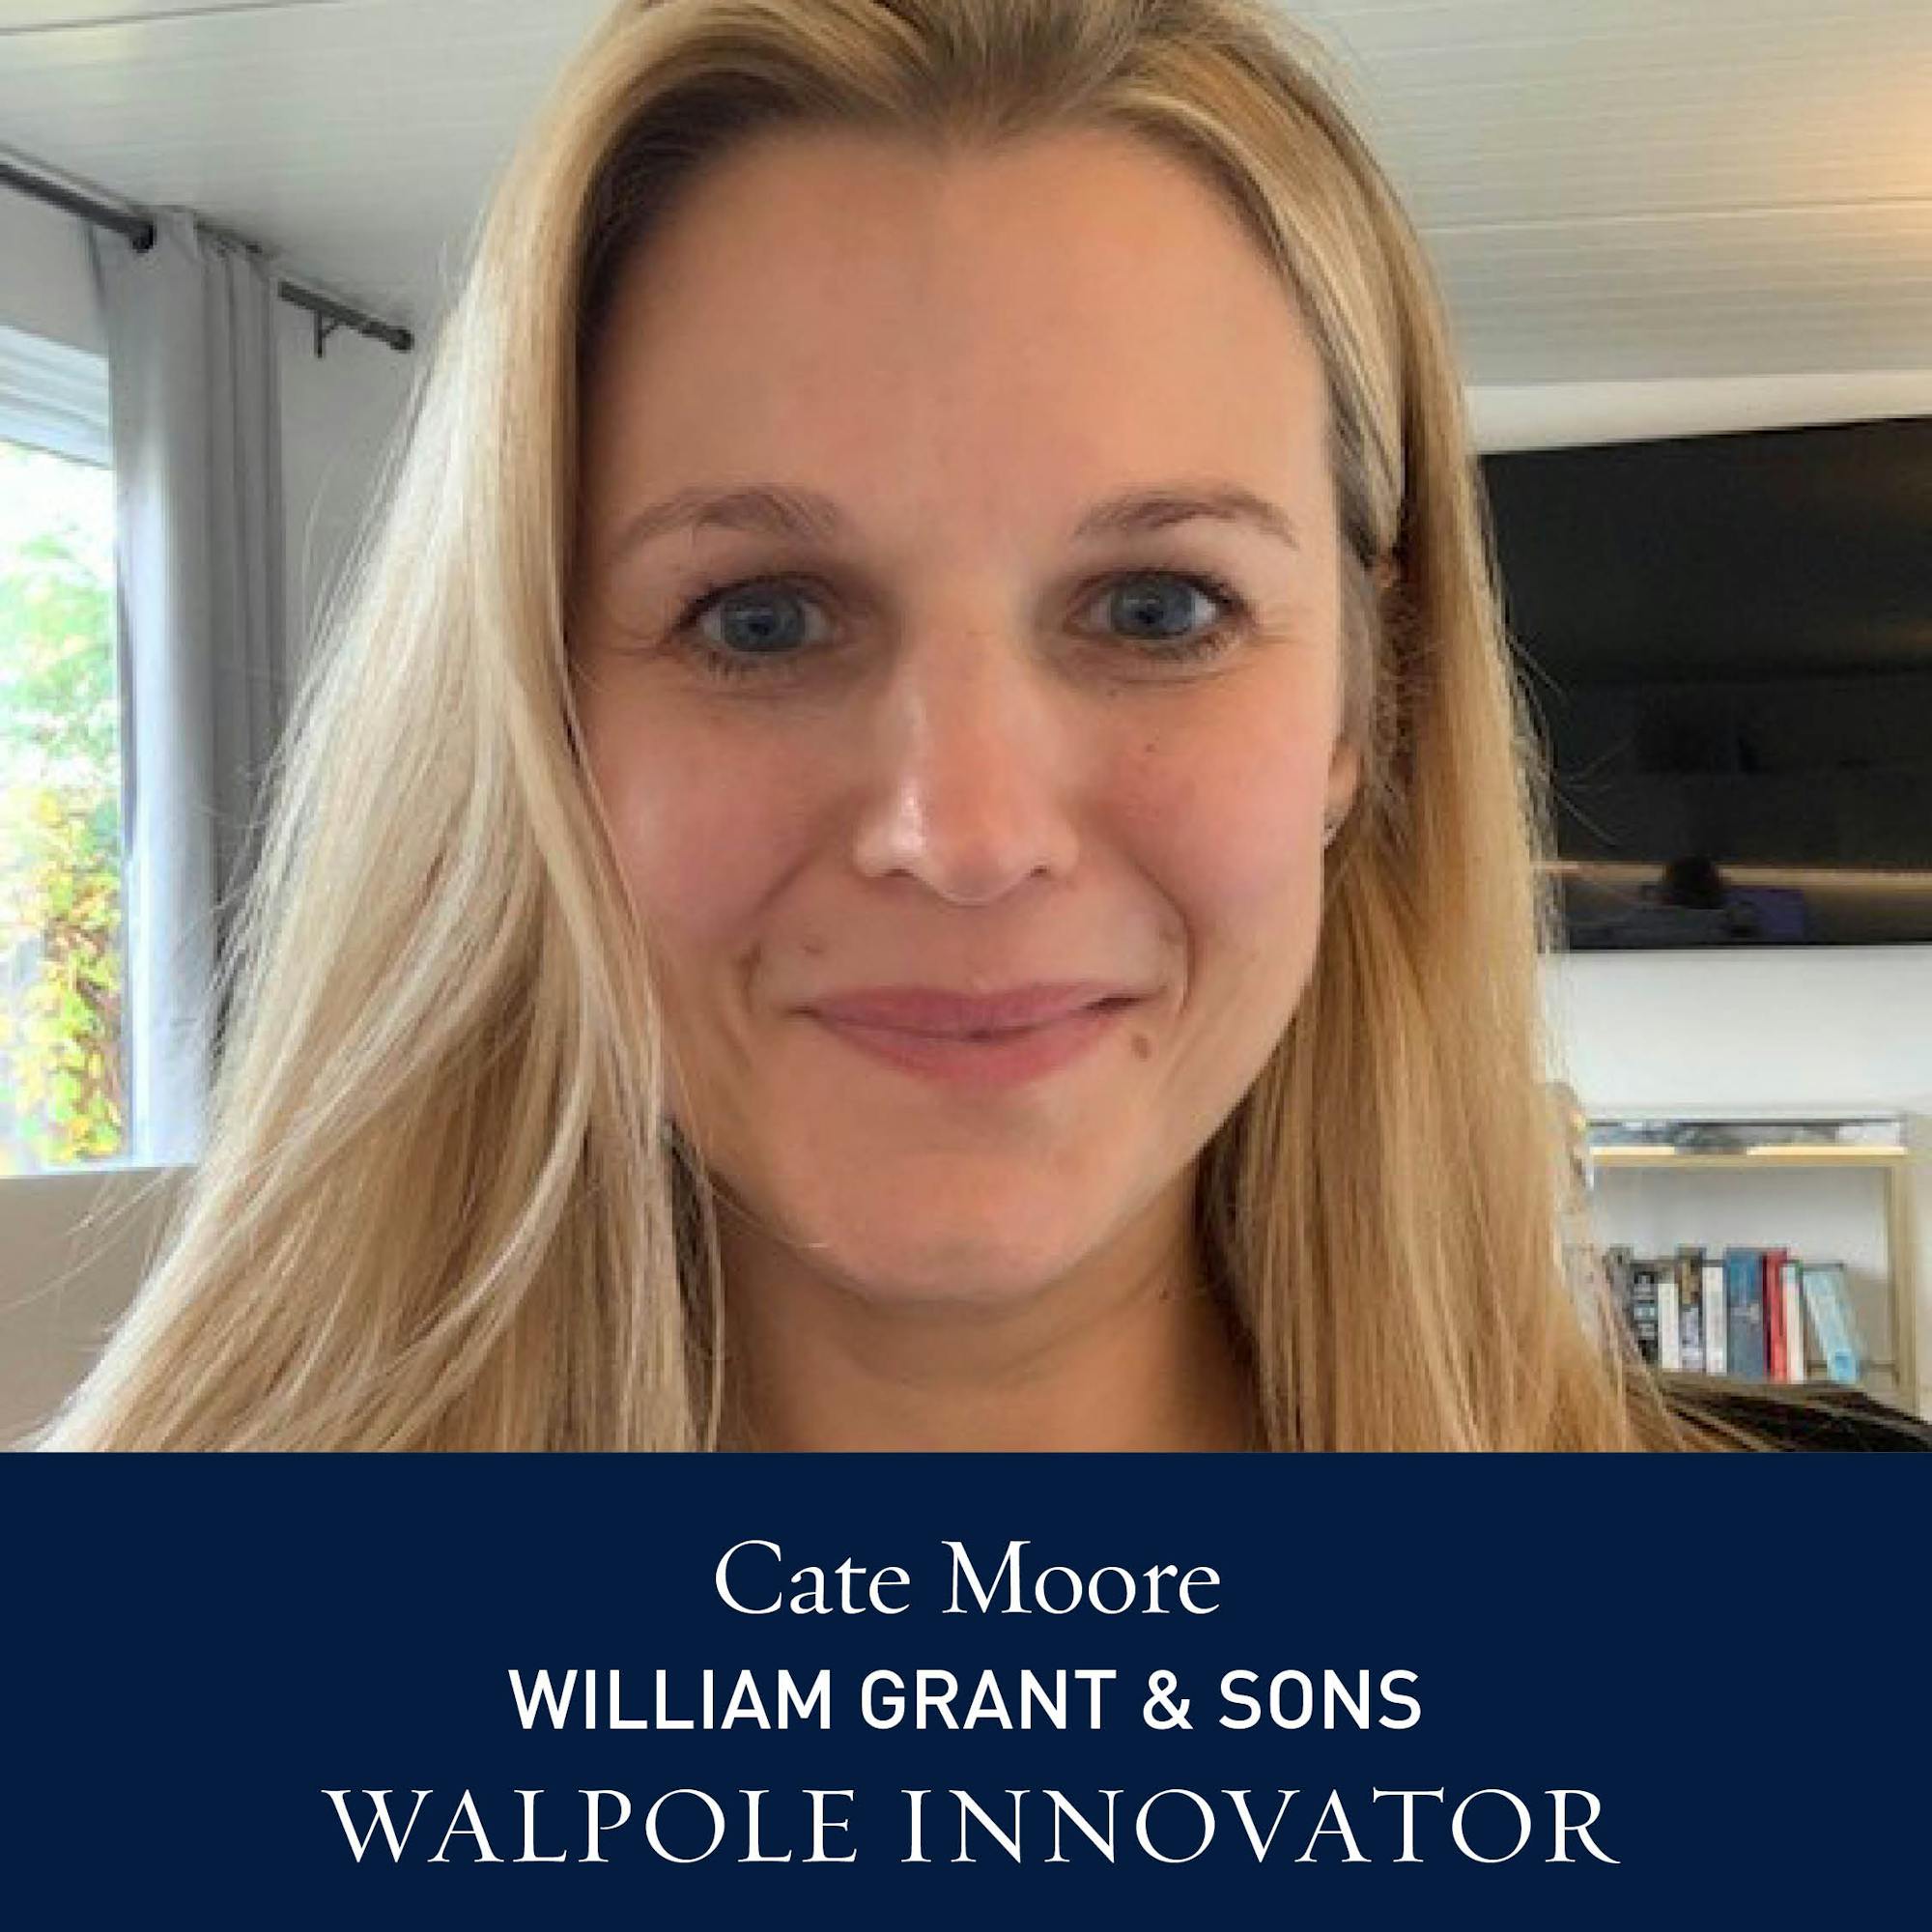 The Walpole Power List  The Innovators: Cate Moore, Global Director of Advocacy, Connections and eCommerce at William Grant & Sons 